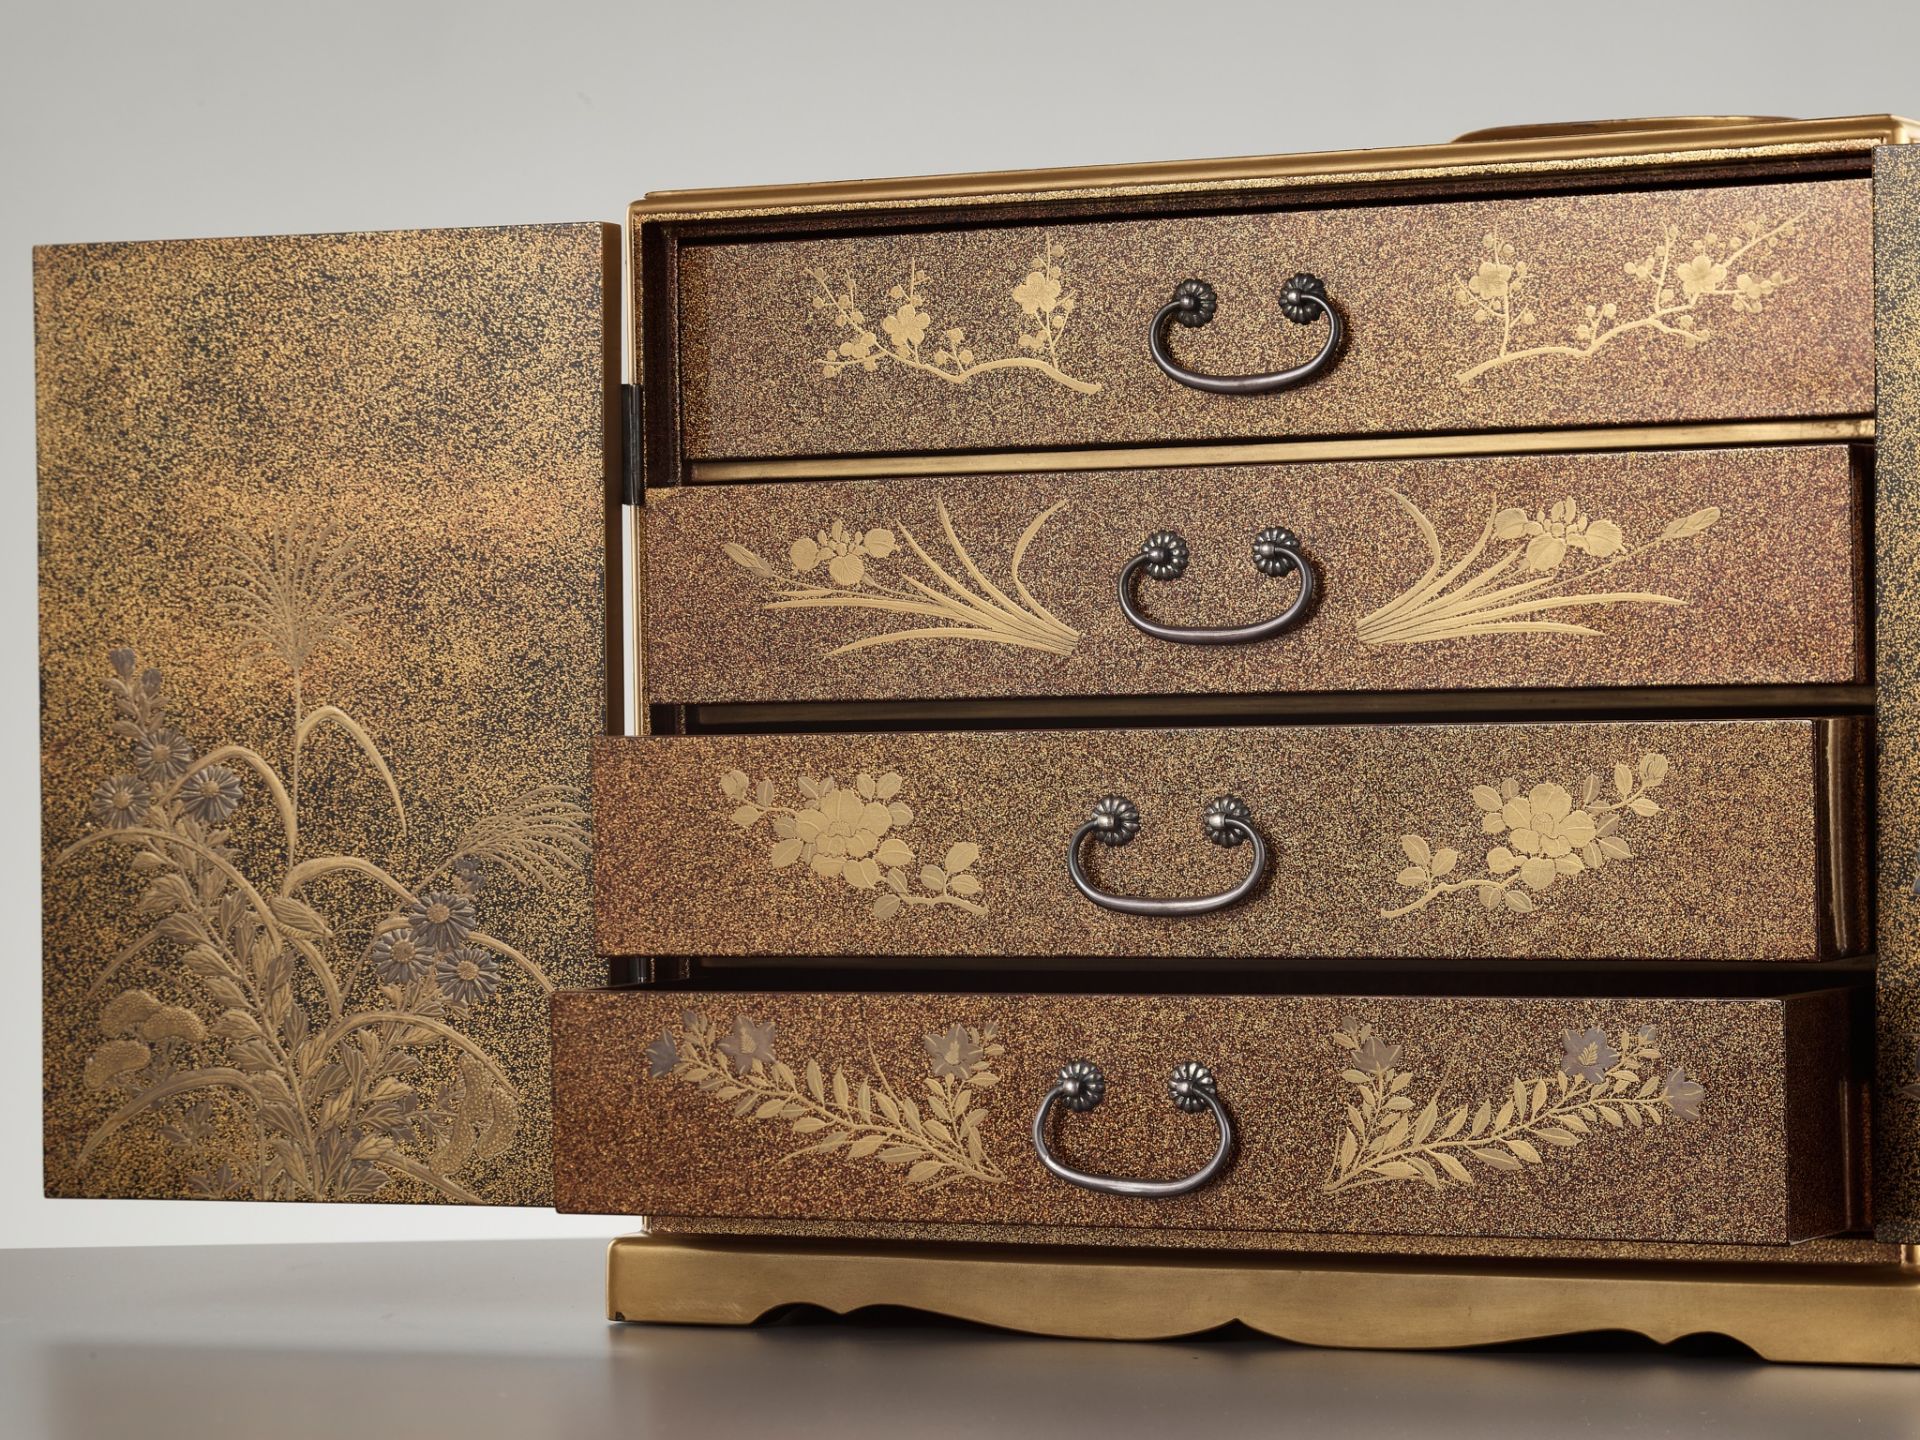 A SUPERB GOLD LACQUER INRO-DANSU (STORAGE CABINET FOR INROS) - Image 15 of 17